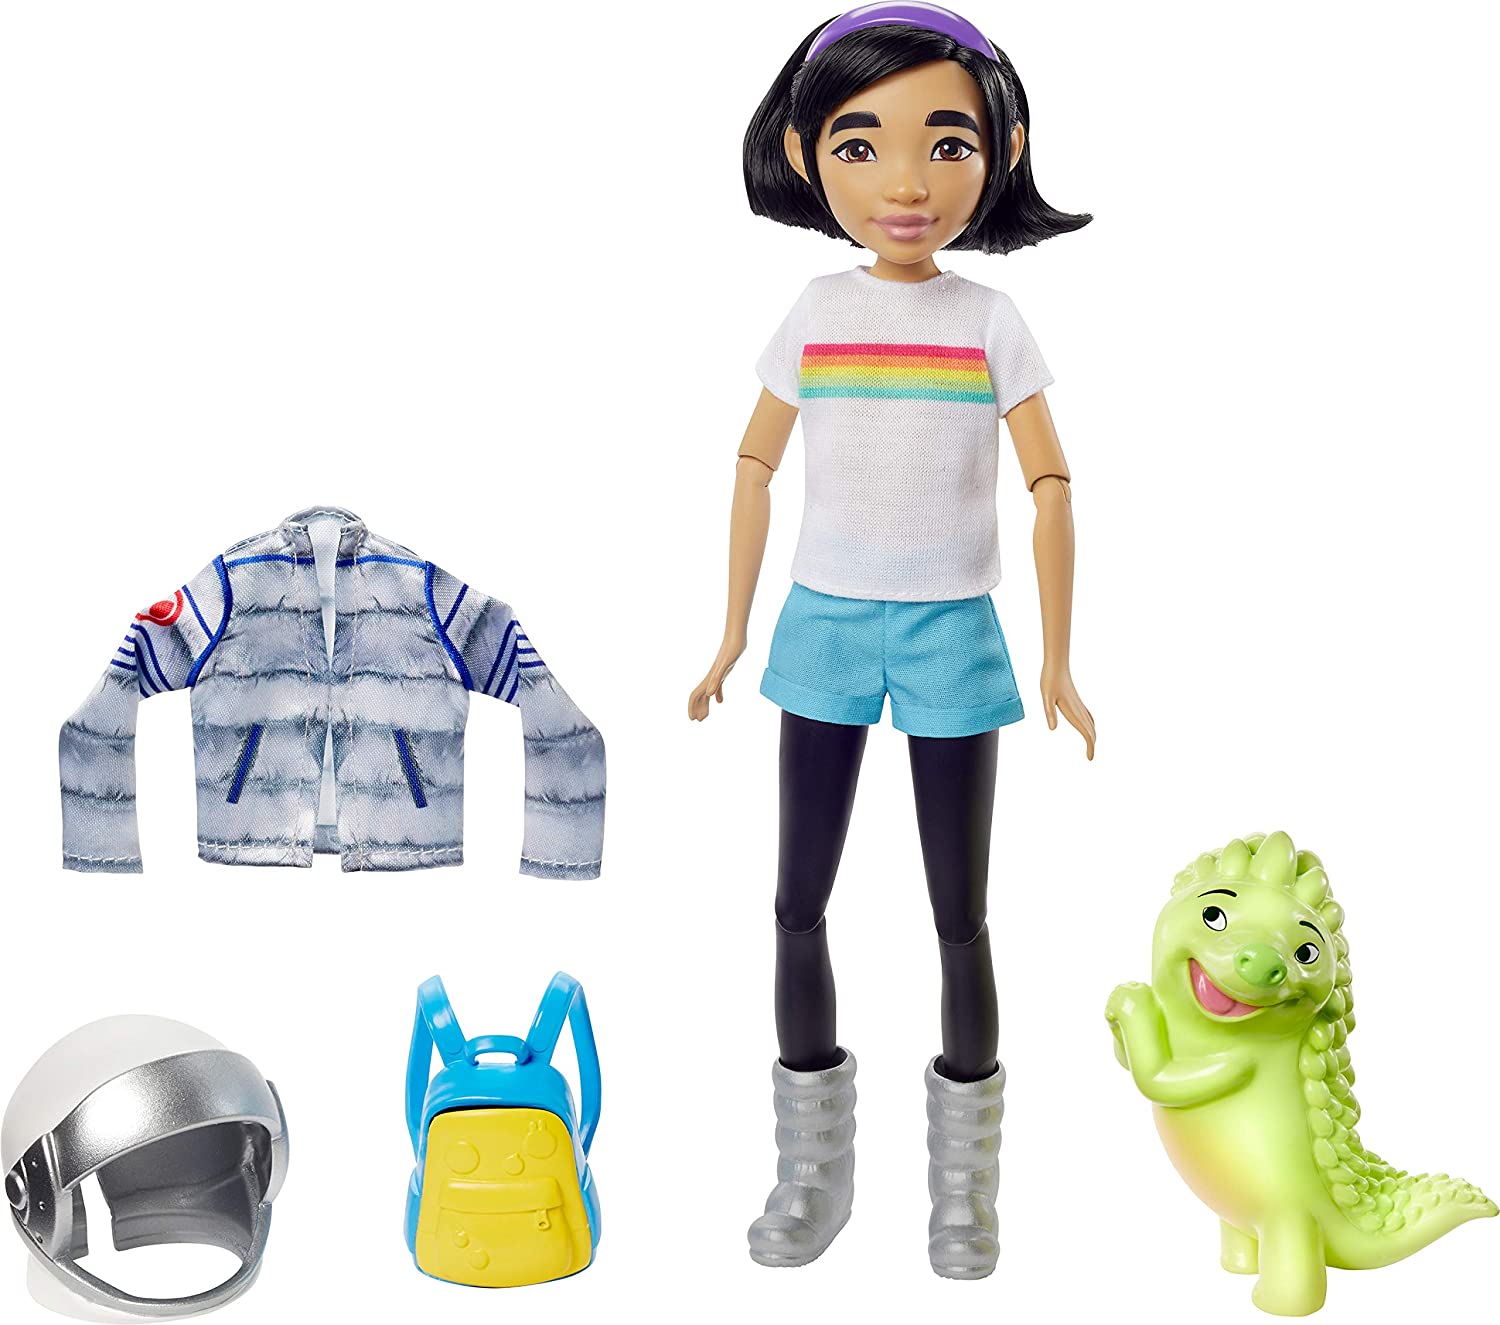 Mattel S Netflix Over The Moon Dolls Are Released Youloveit Com